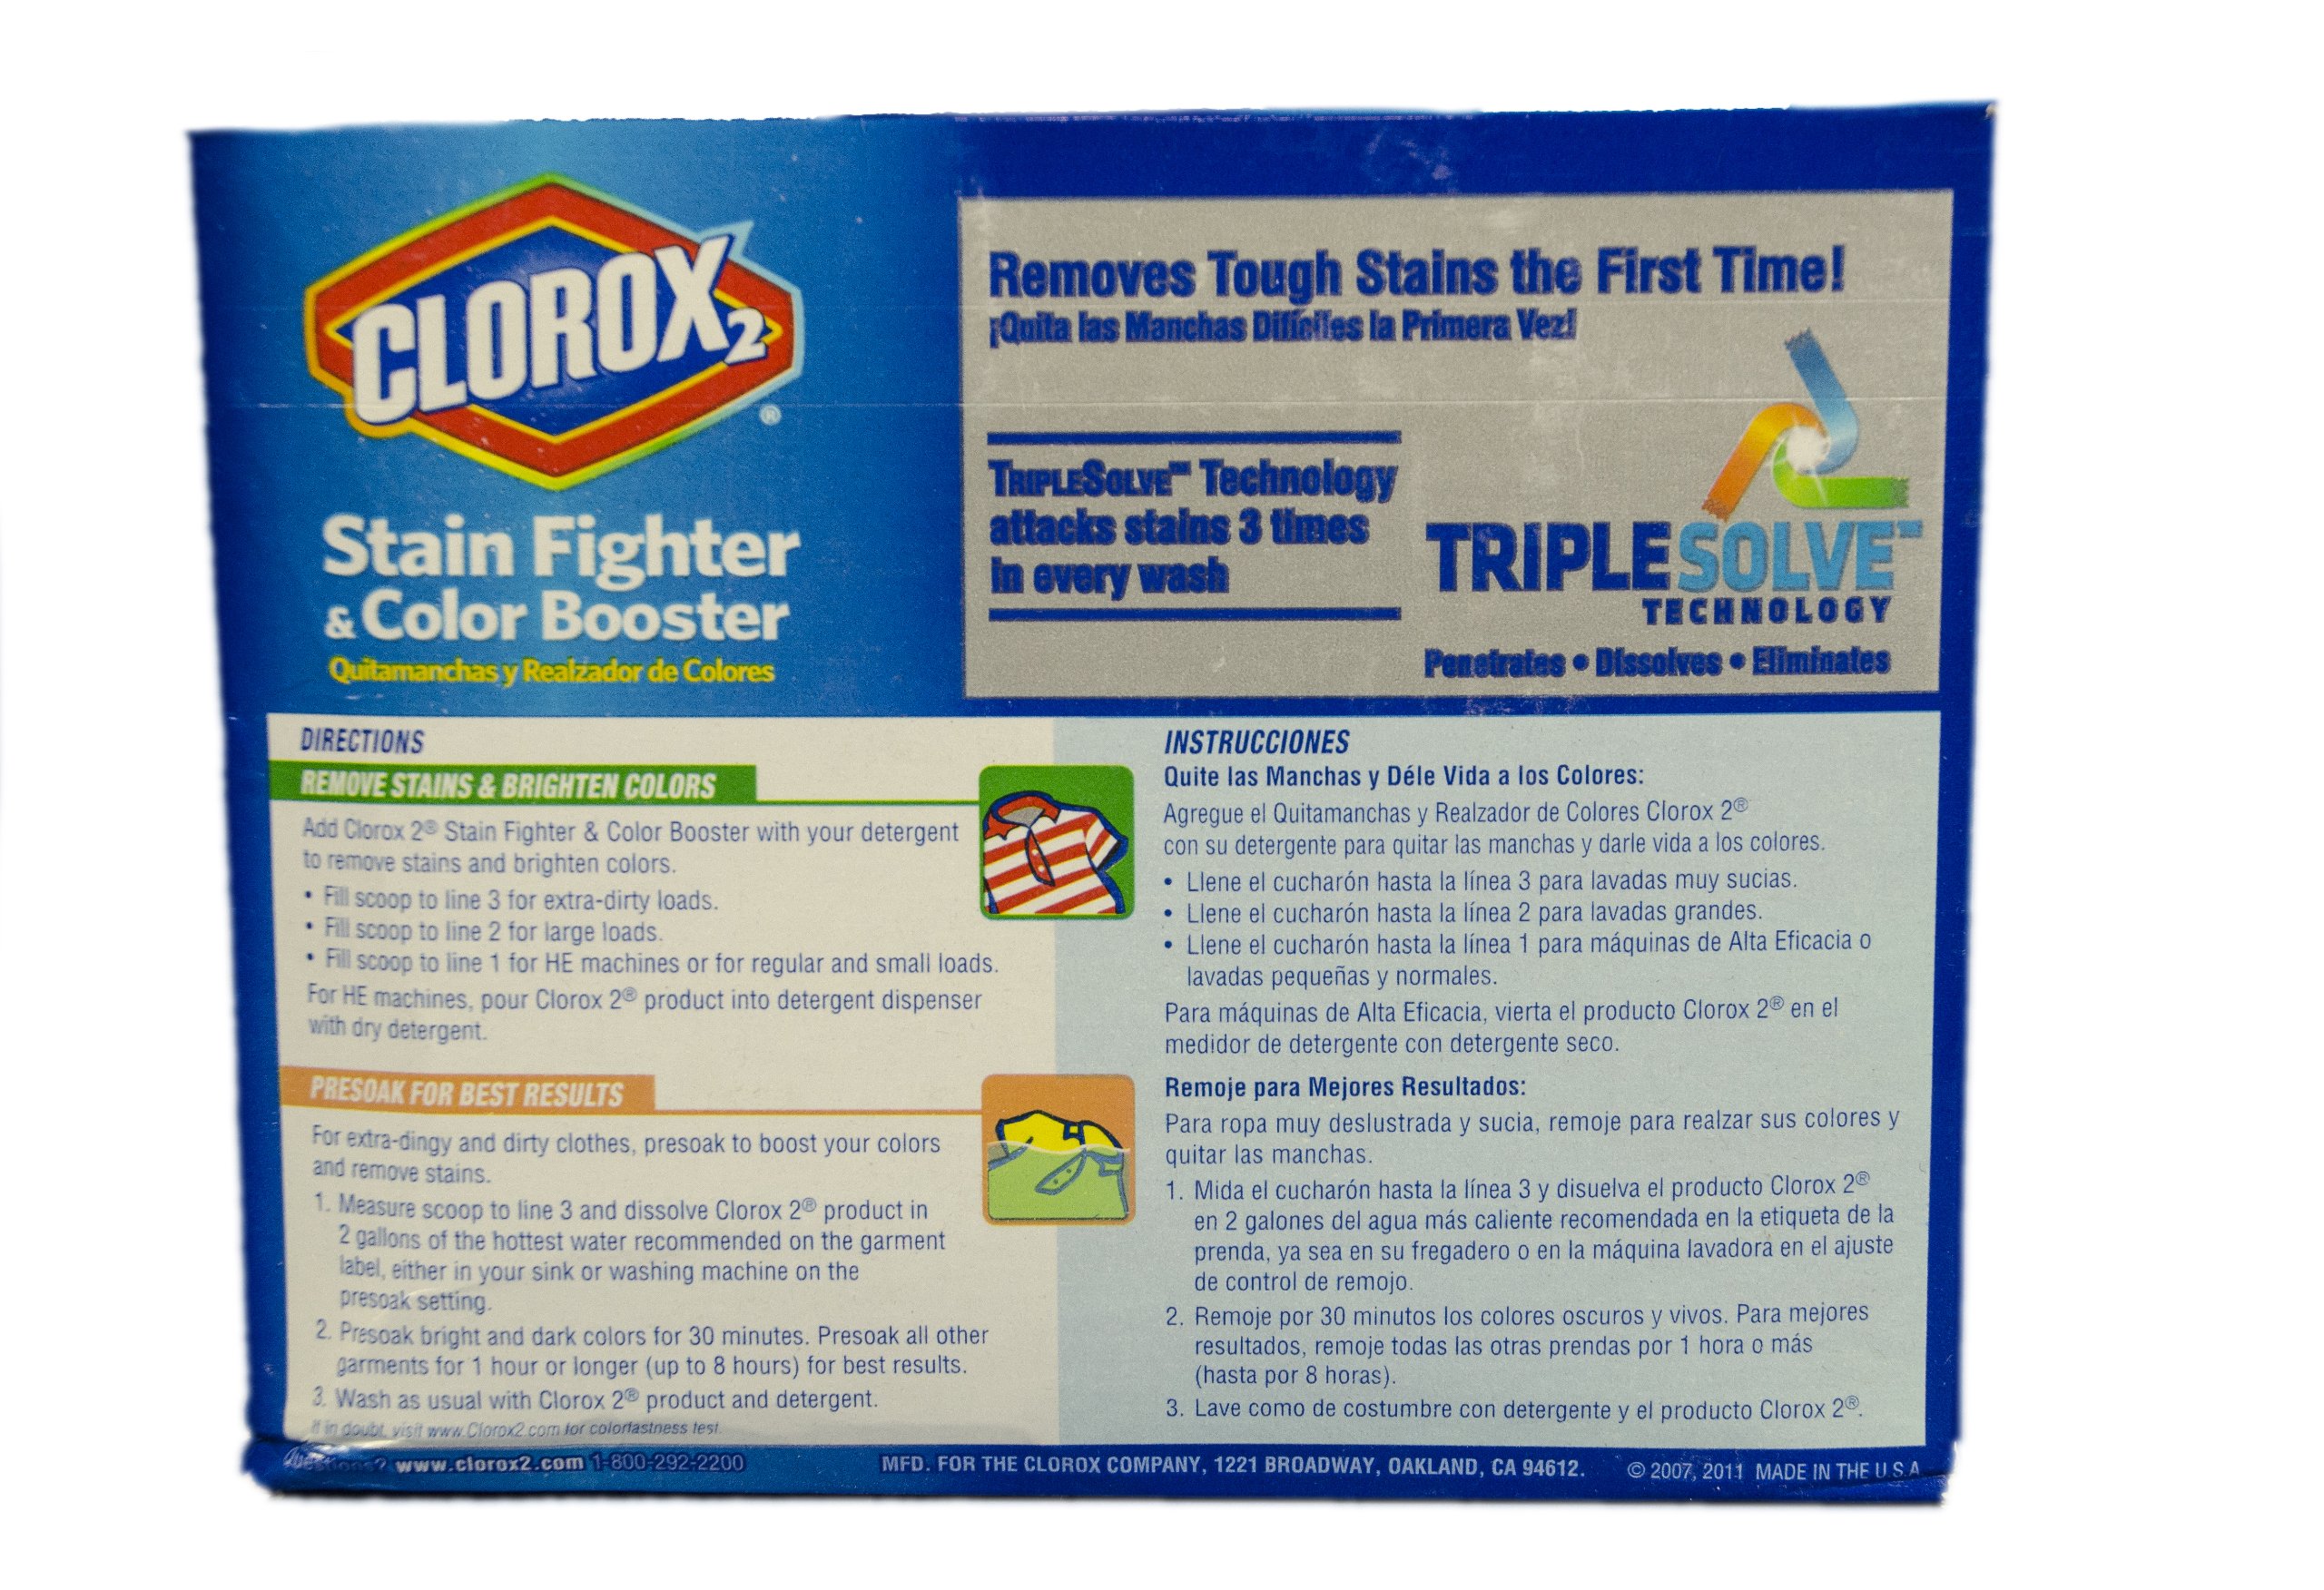 Clorox Bleach Label Warnings Click For Larger Image And